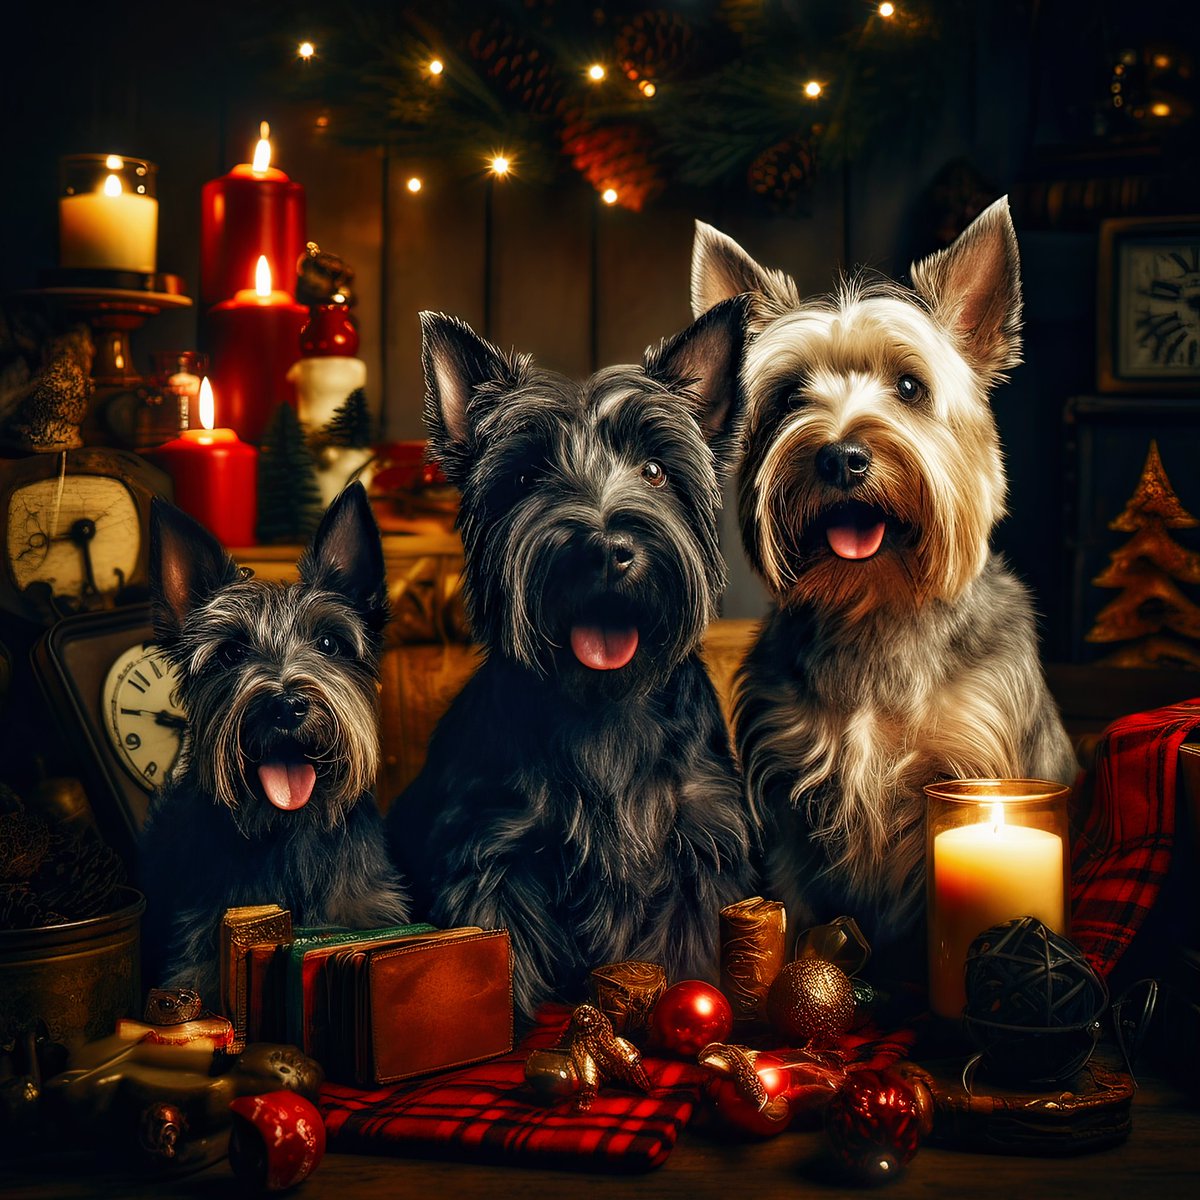 For your Sunday morning Ai viewing hope everyone's furkiddos are getting ready for Christmas and there hasn't been any nauuughty pups this year Lol Created by Midjourney Ai Bot then lots and lots of editing in photoshop